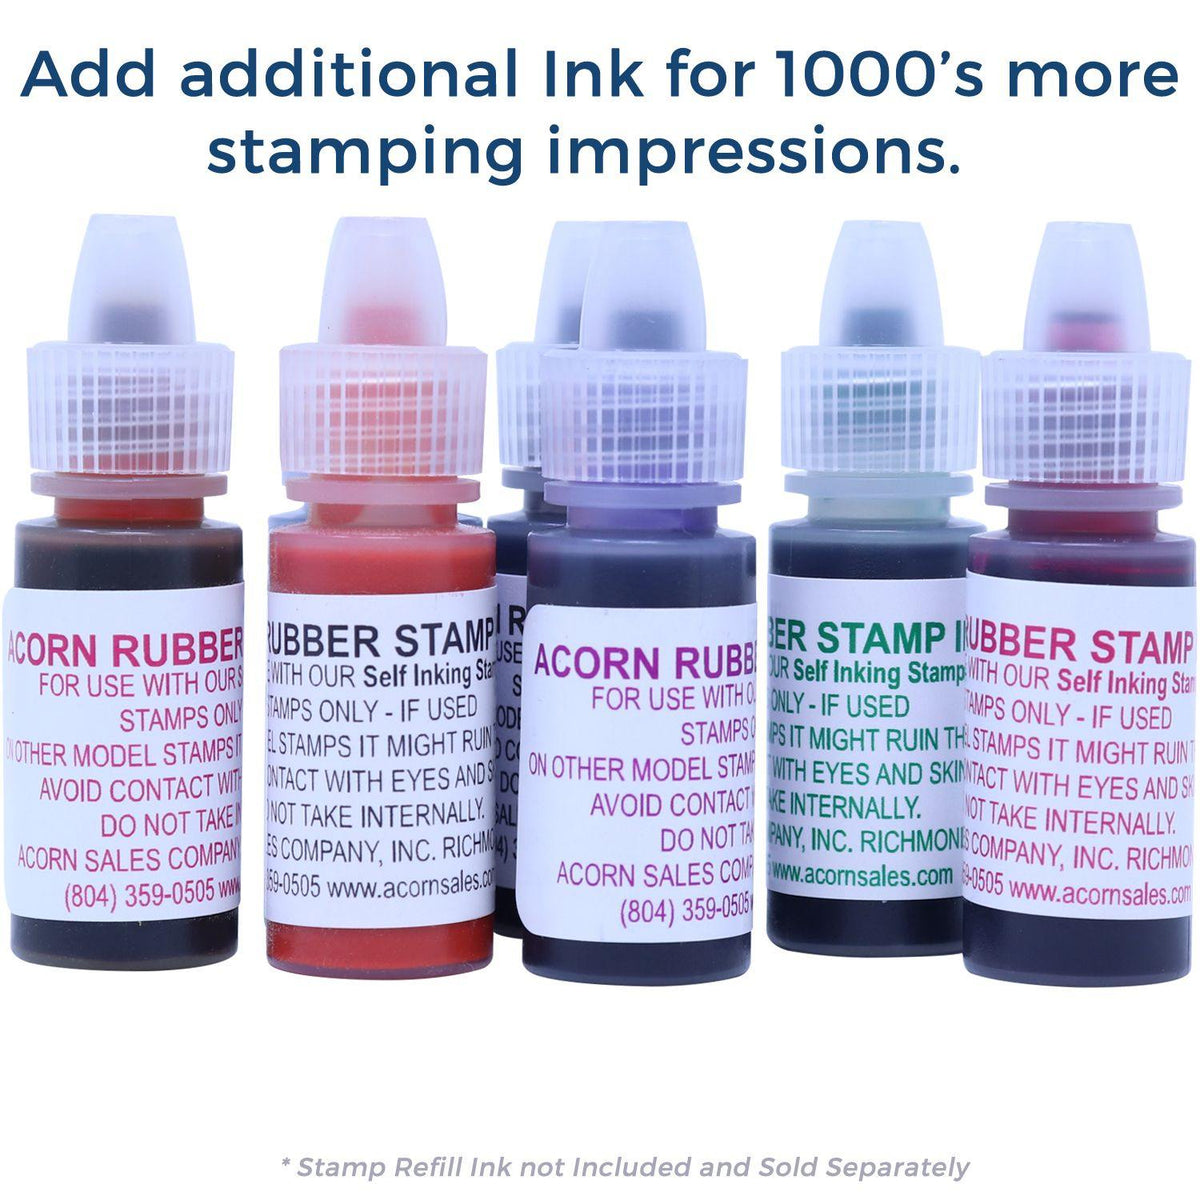 Refill Inks for Large Pre-Inked Revisado Stamp Available